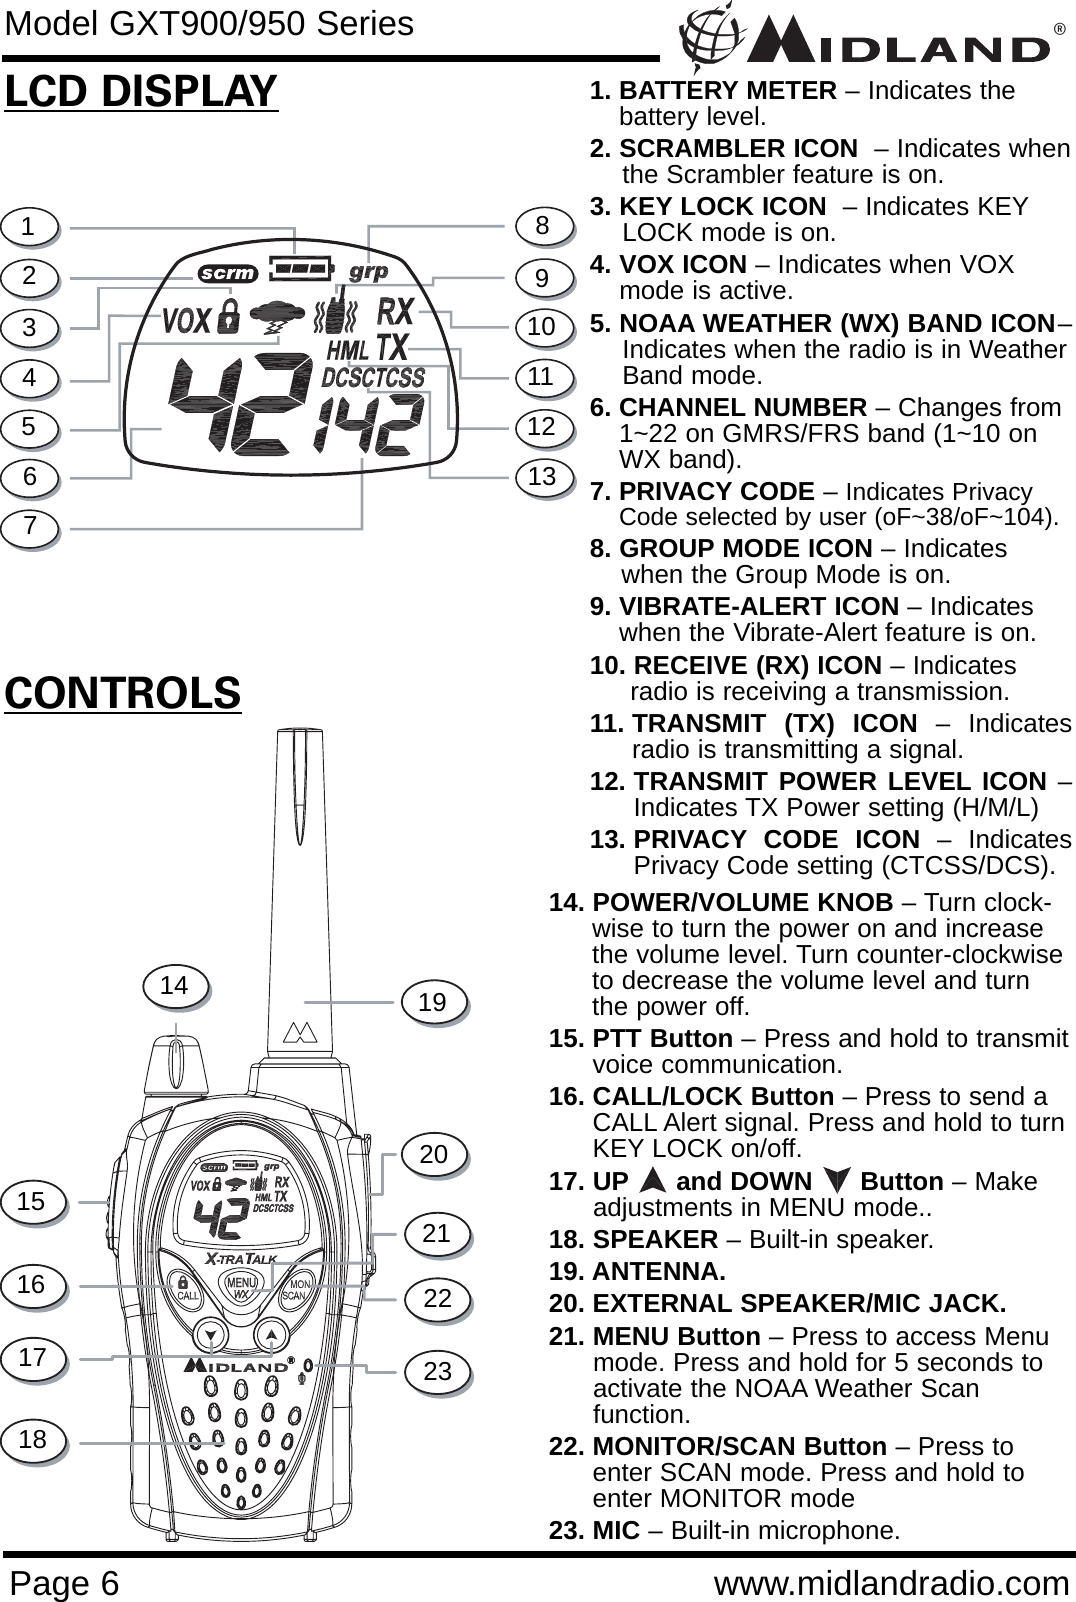 ®Page 6 www.midlandradio.comCONTROLSLCD DISPLAY1. BATTERY METER – Indicates thebattery level.2. SCRAMBLER ICON  – Indicates whenthe Scrambler feature is on. 3. KEY LOCK ICON  – Indicates KEYLOCK mode is on.4. VOX ICON – Indicates when VOX mode is active.5. NOAA WEATHER (WX) BAND ICON–Indicates when the radio is in WeatherBand mode.6. CHANNEL NUMBER – Changes from1~22 on GMRS/FRS band (1~10 onWX band).7. PRIVACY CODE – Indicates PrivacyCode selected by user (oF~38/oF~104).8. GROUP MODE ICON – Indicates when the Group Mode is on.  9. VIBRATE-ALERT ICON – Indicates when the Vibrate-Alert feature is on. 10. RECEIVE (RX) ICON – Indicates radio is receiving a transmission.11. TRANSMIT (TX) ICON – Indicatesradio is transmitting a signal.12. TRANSMIT POWER LEVEL ICON –Indicates TX Power setting (H/M/L)13. PRIVACY CODE ICON – IndicatesPrivacy Code setting (CTCSS/DCS).14. POWER/VOLUME KNOB – Turn clock-wise to turn the power on and increasethe volume level. Turn counter-clockwiseto decrease the volume level and turnthe power off.15. PTT Button – Press and hold to transmitvoice communication. 16. CALL/LOCK Button – Press to send aCALL Alert signal. Press and hold to turnKEY LOCK on/off.17. UP and DOWN      Button – Make adjustments in MENU mode..18. SPEAKER – Built-in speaker.19. ANTENNA.20. EXTERNAL SPEAKER/MIC JACK.21. MENU Button – Press to access Menu mode. Press and hold for 5 seconds to activate the NOAA Weather Scan     function.22. MONITOR/SCAN Button – Press toenter SCAN mode. Press and hold toenter MONITOR mode23. MIC – Built-in microphone.1234567891014151617182322212019Model GXT900/950 Series111213